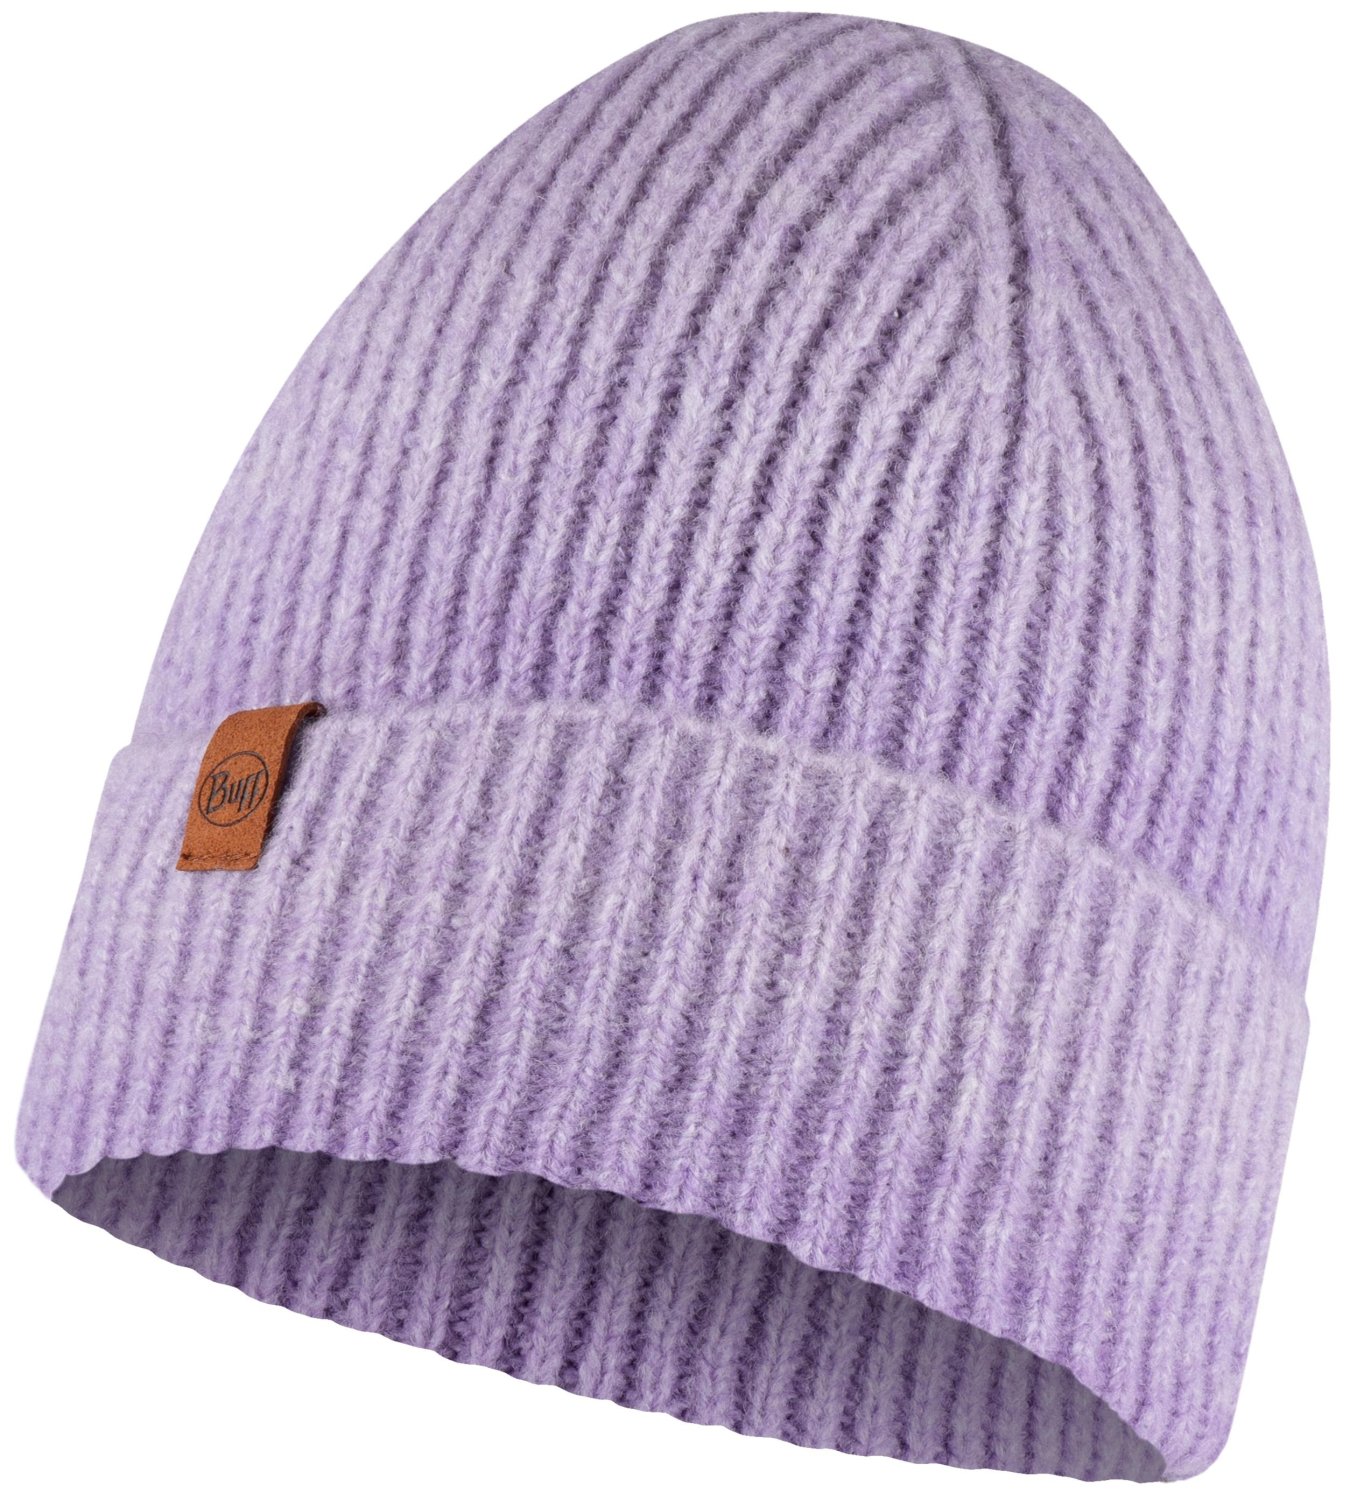 Шапка Buff Knitted Hat Marin Lavender US:one size, 123514.728.10.00